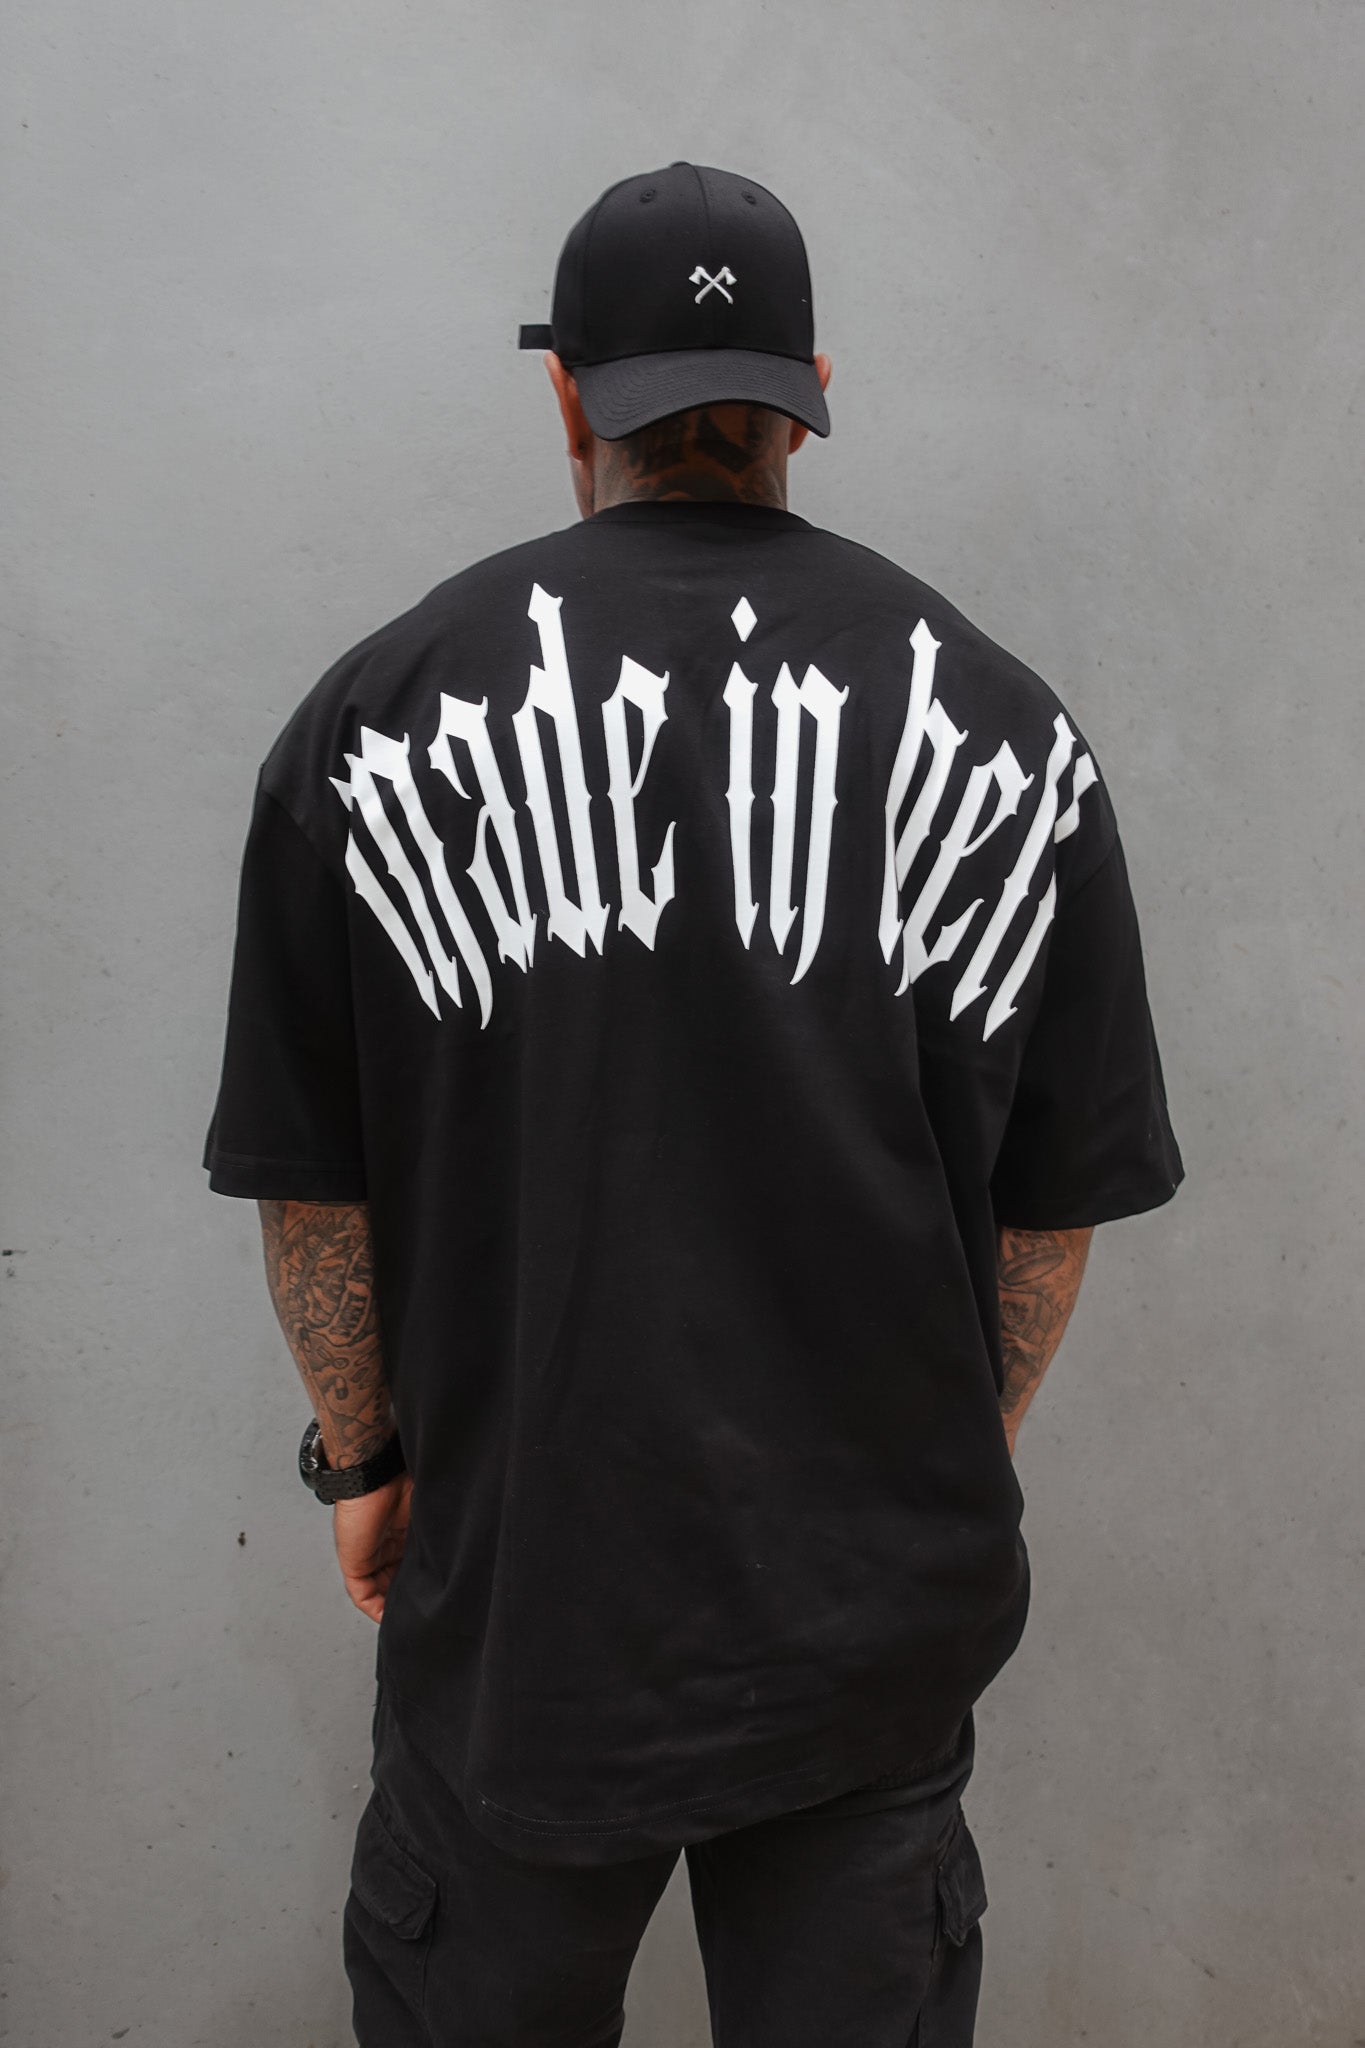 The Made in Hell Tee